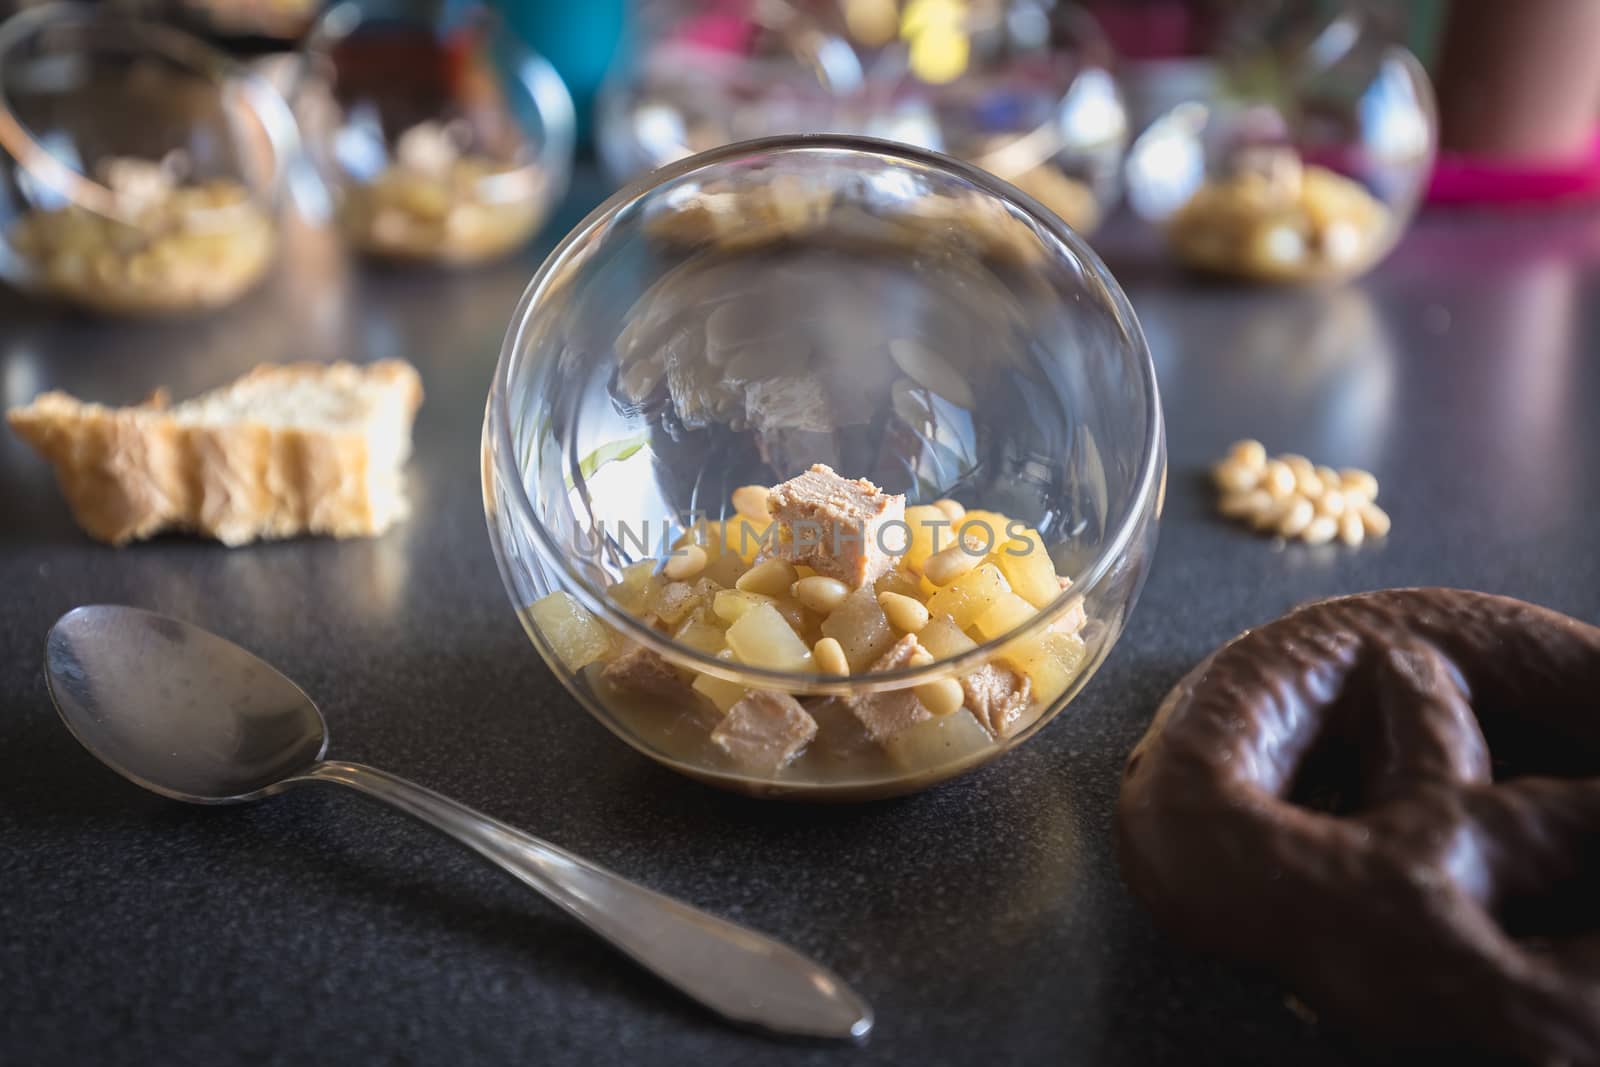 Verrine of pear foie gras and pine nuts by AtlanticEUROSTOXX